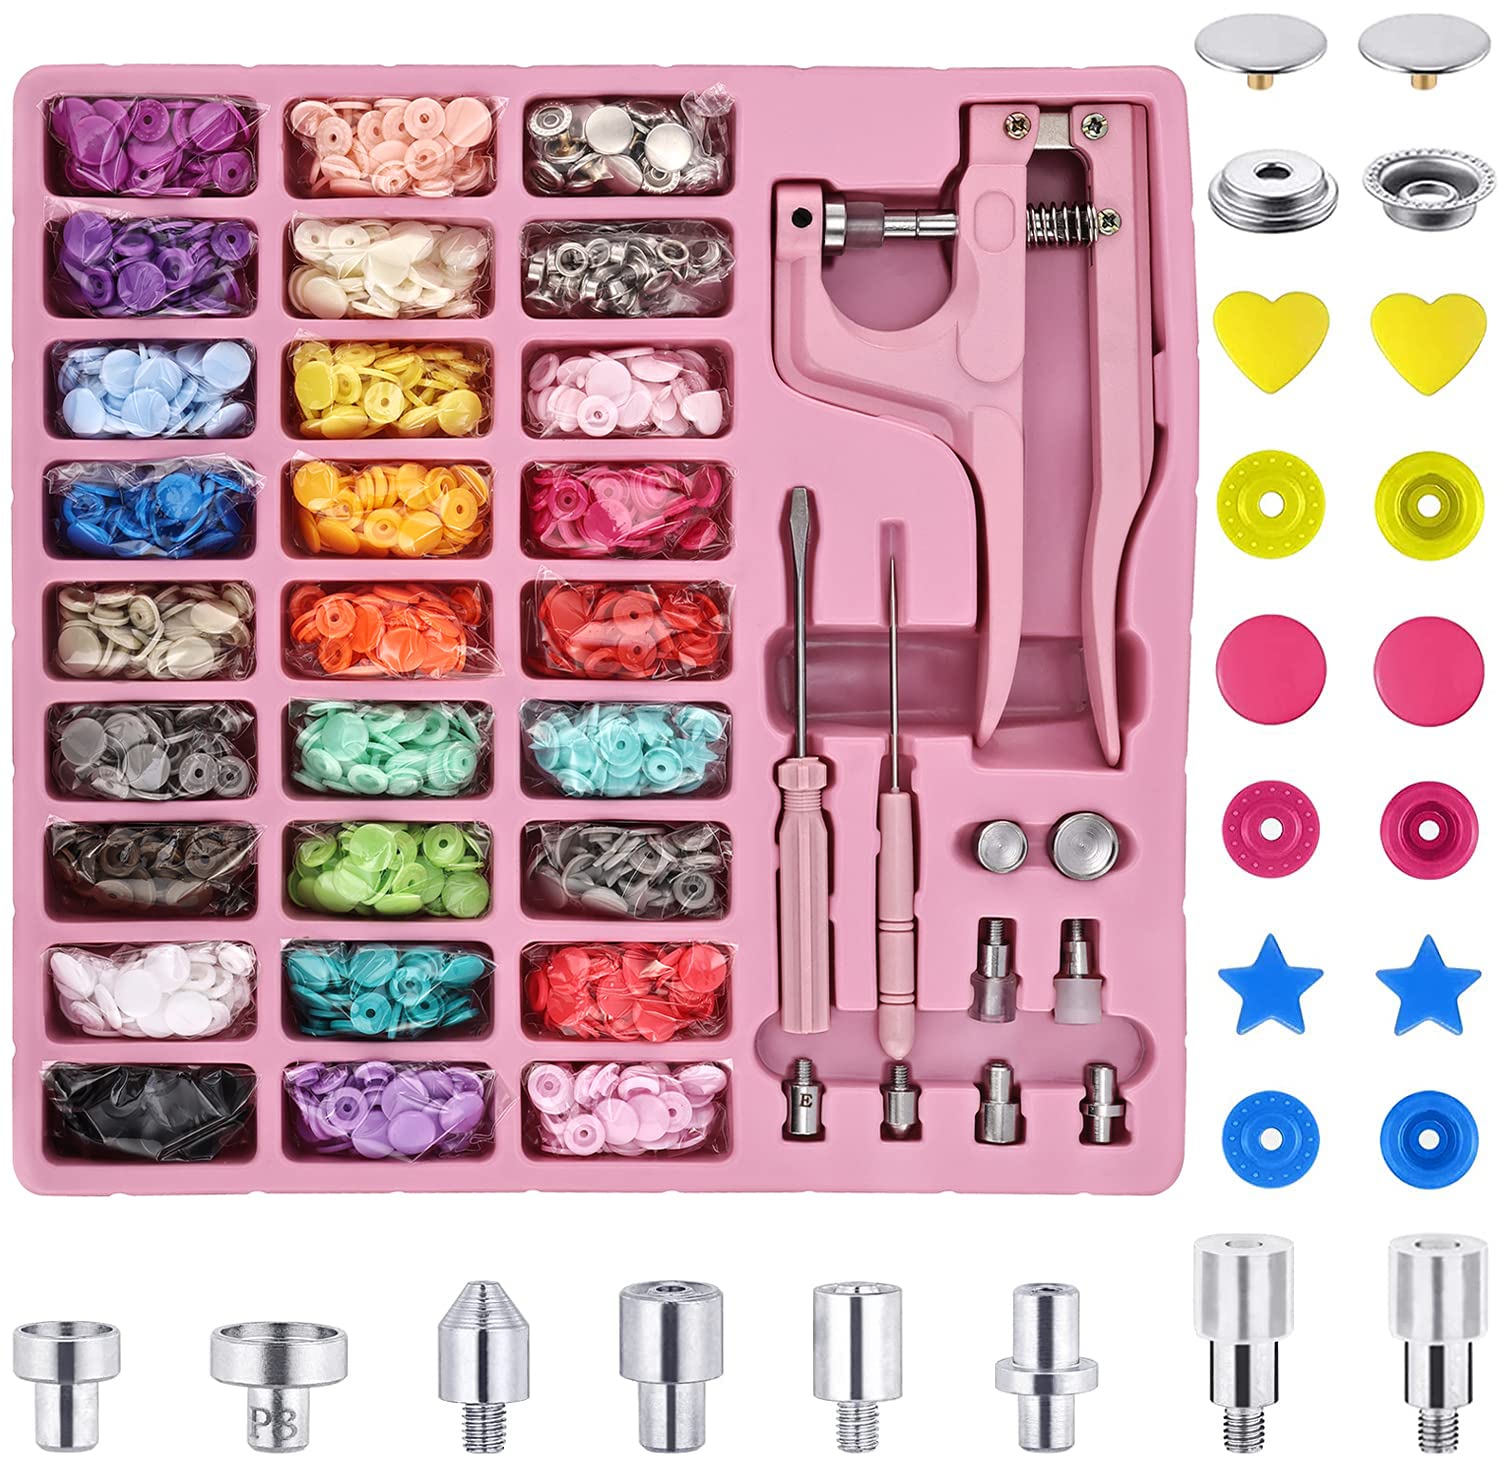 CENOZ 300 Sets T5 Plastic Plastic and Metal Snap Buttons with Snaps Pliers  Set Colorful Buttons with Metal Snap Buttons for Clothes Sewing Crafting  PINK